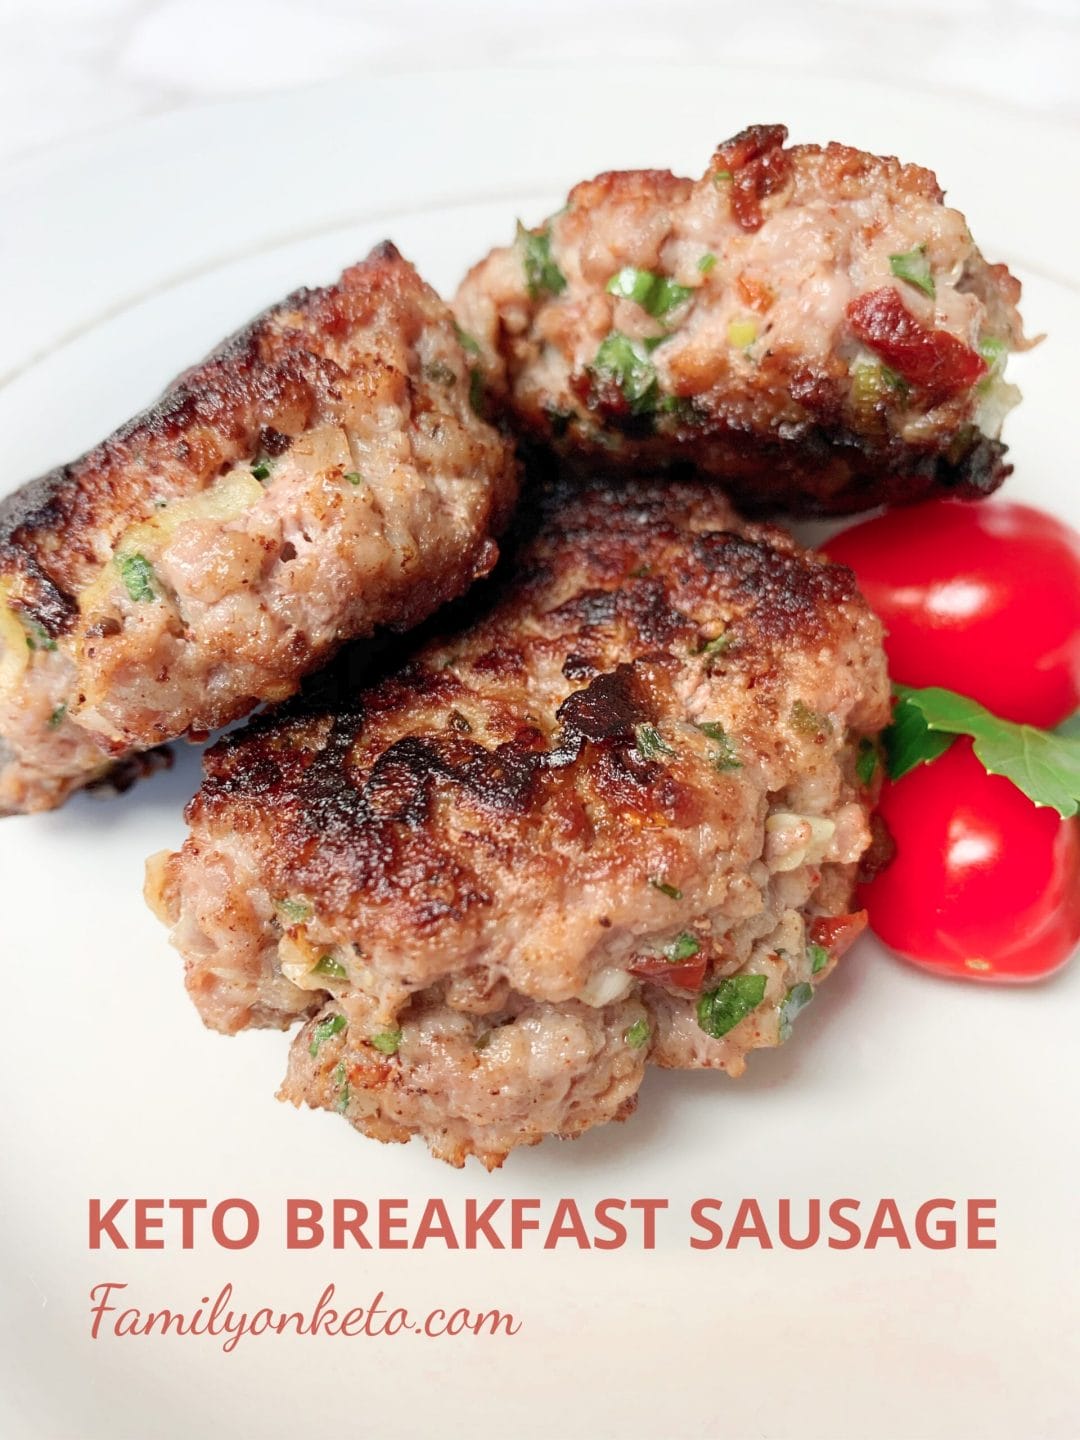 Picture of breakfast sausages with sun dried tomatoes, basil and parsley